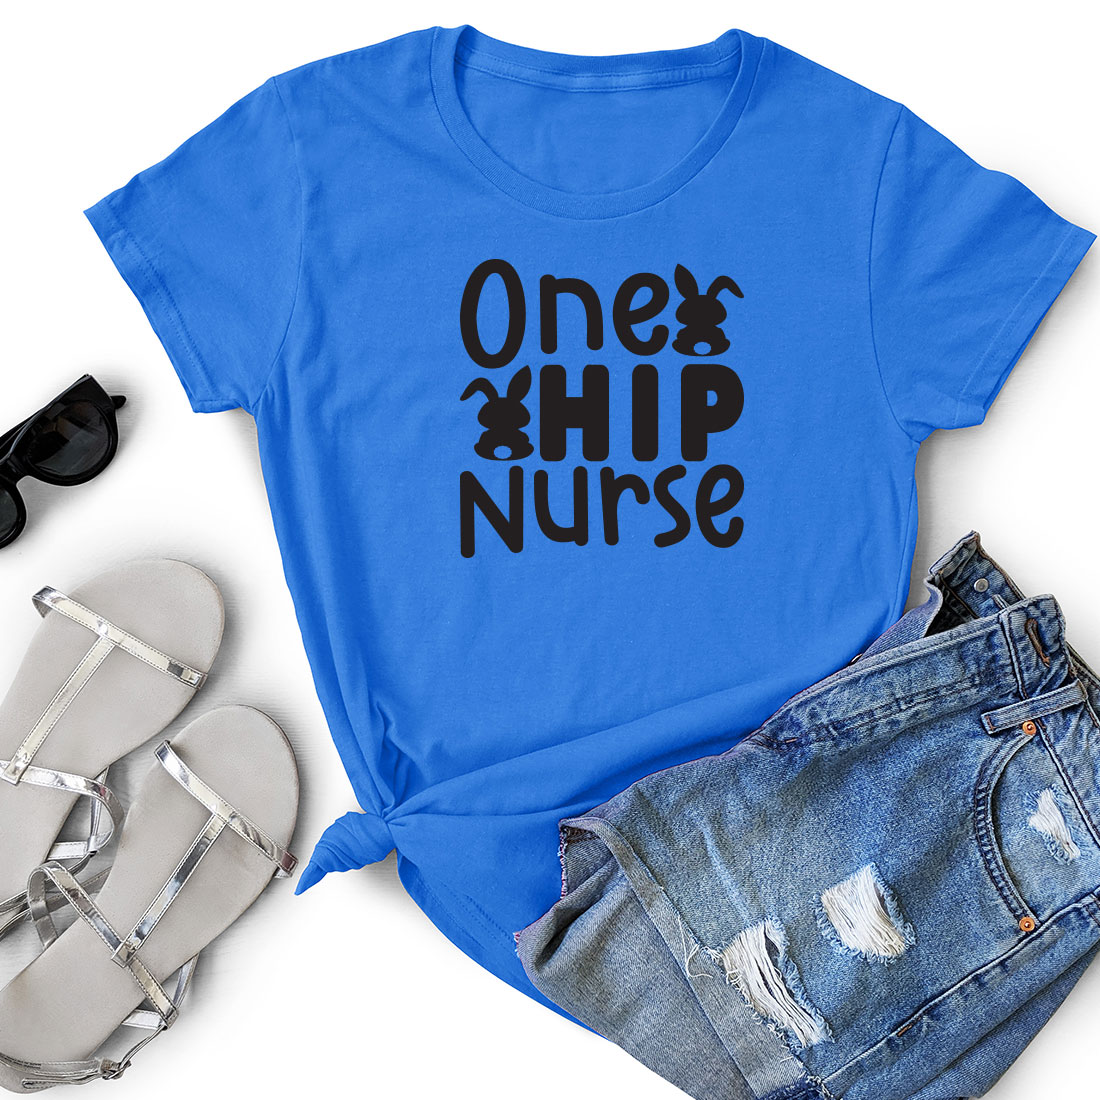 T - shirt that says one hip nurse next to a pair of shorts.